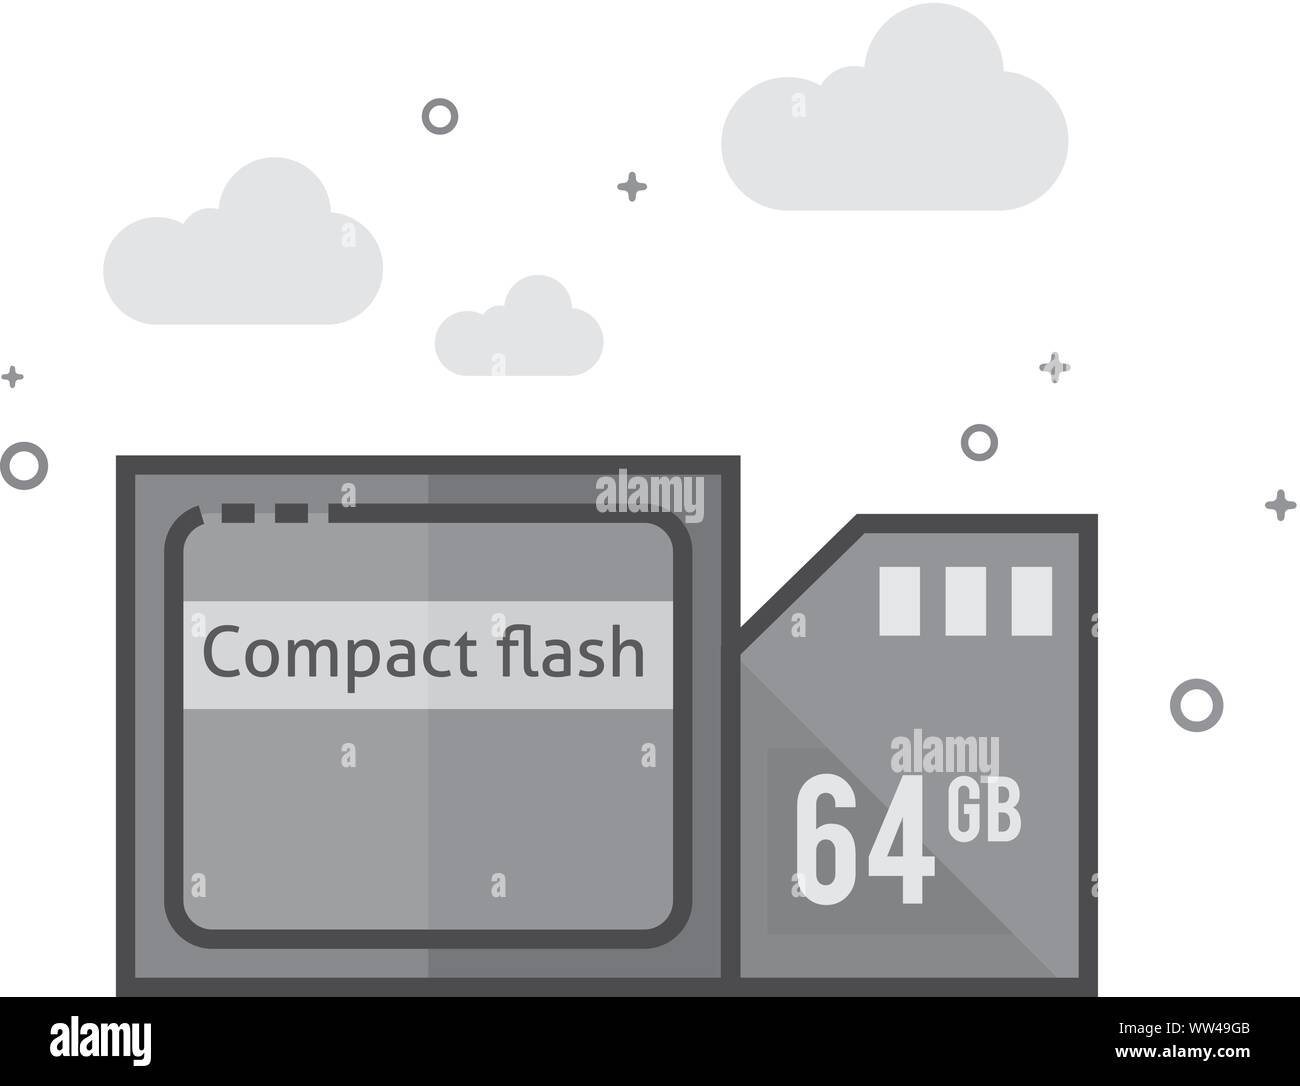 Compact flash and SD card icon in flat outlined grayscale style. Vector illustration. Stock Vector